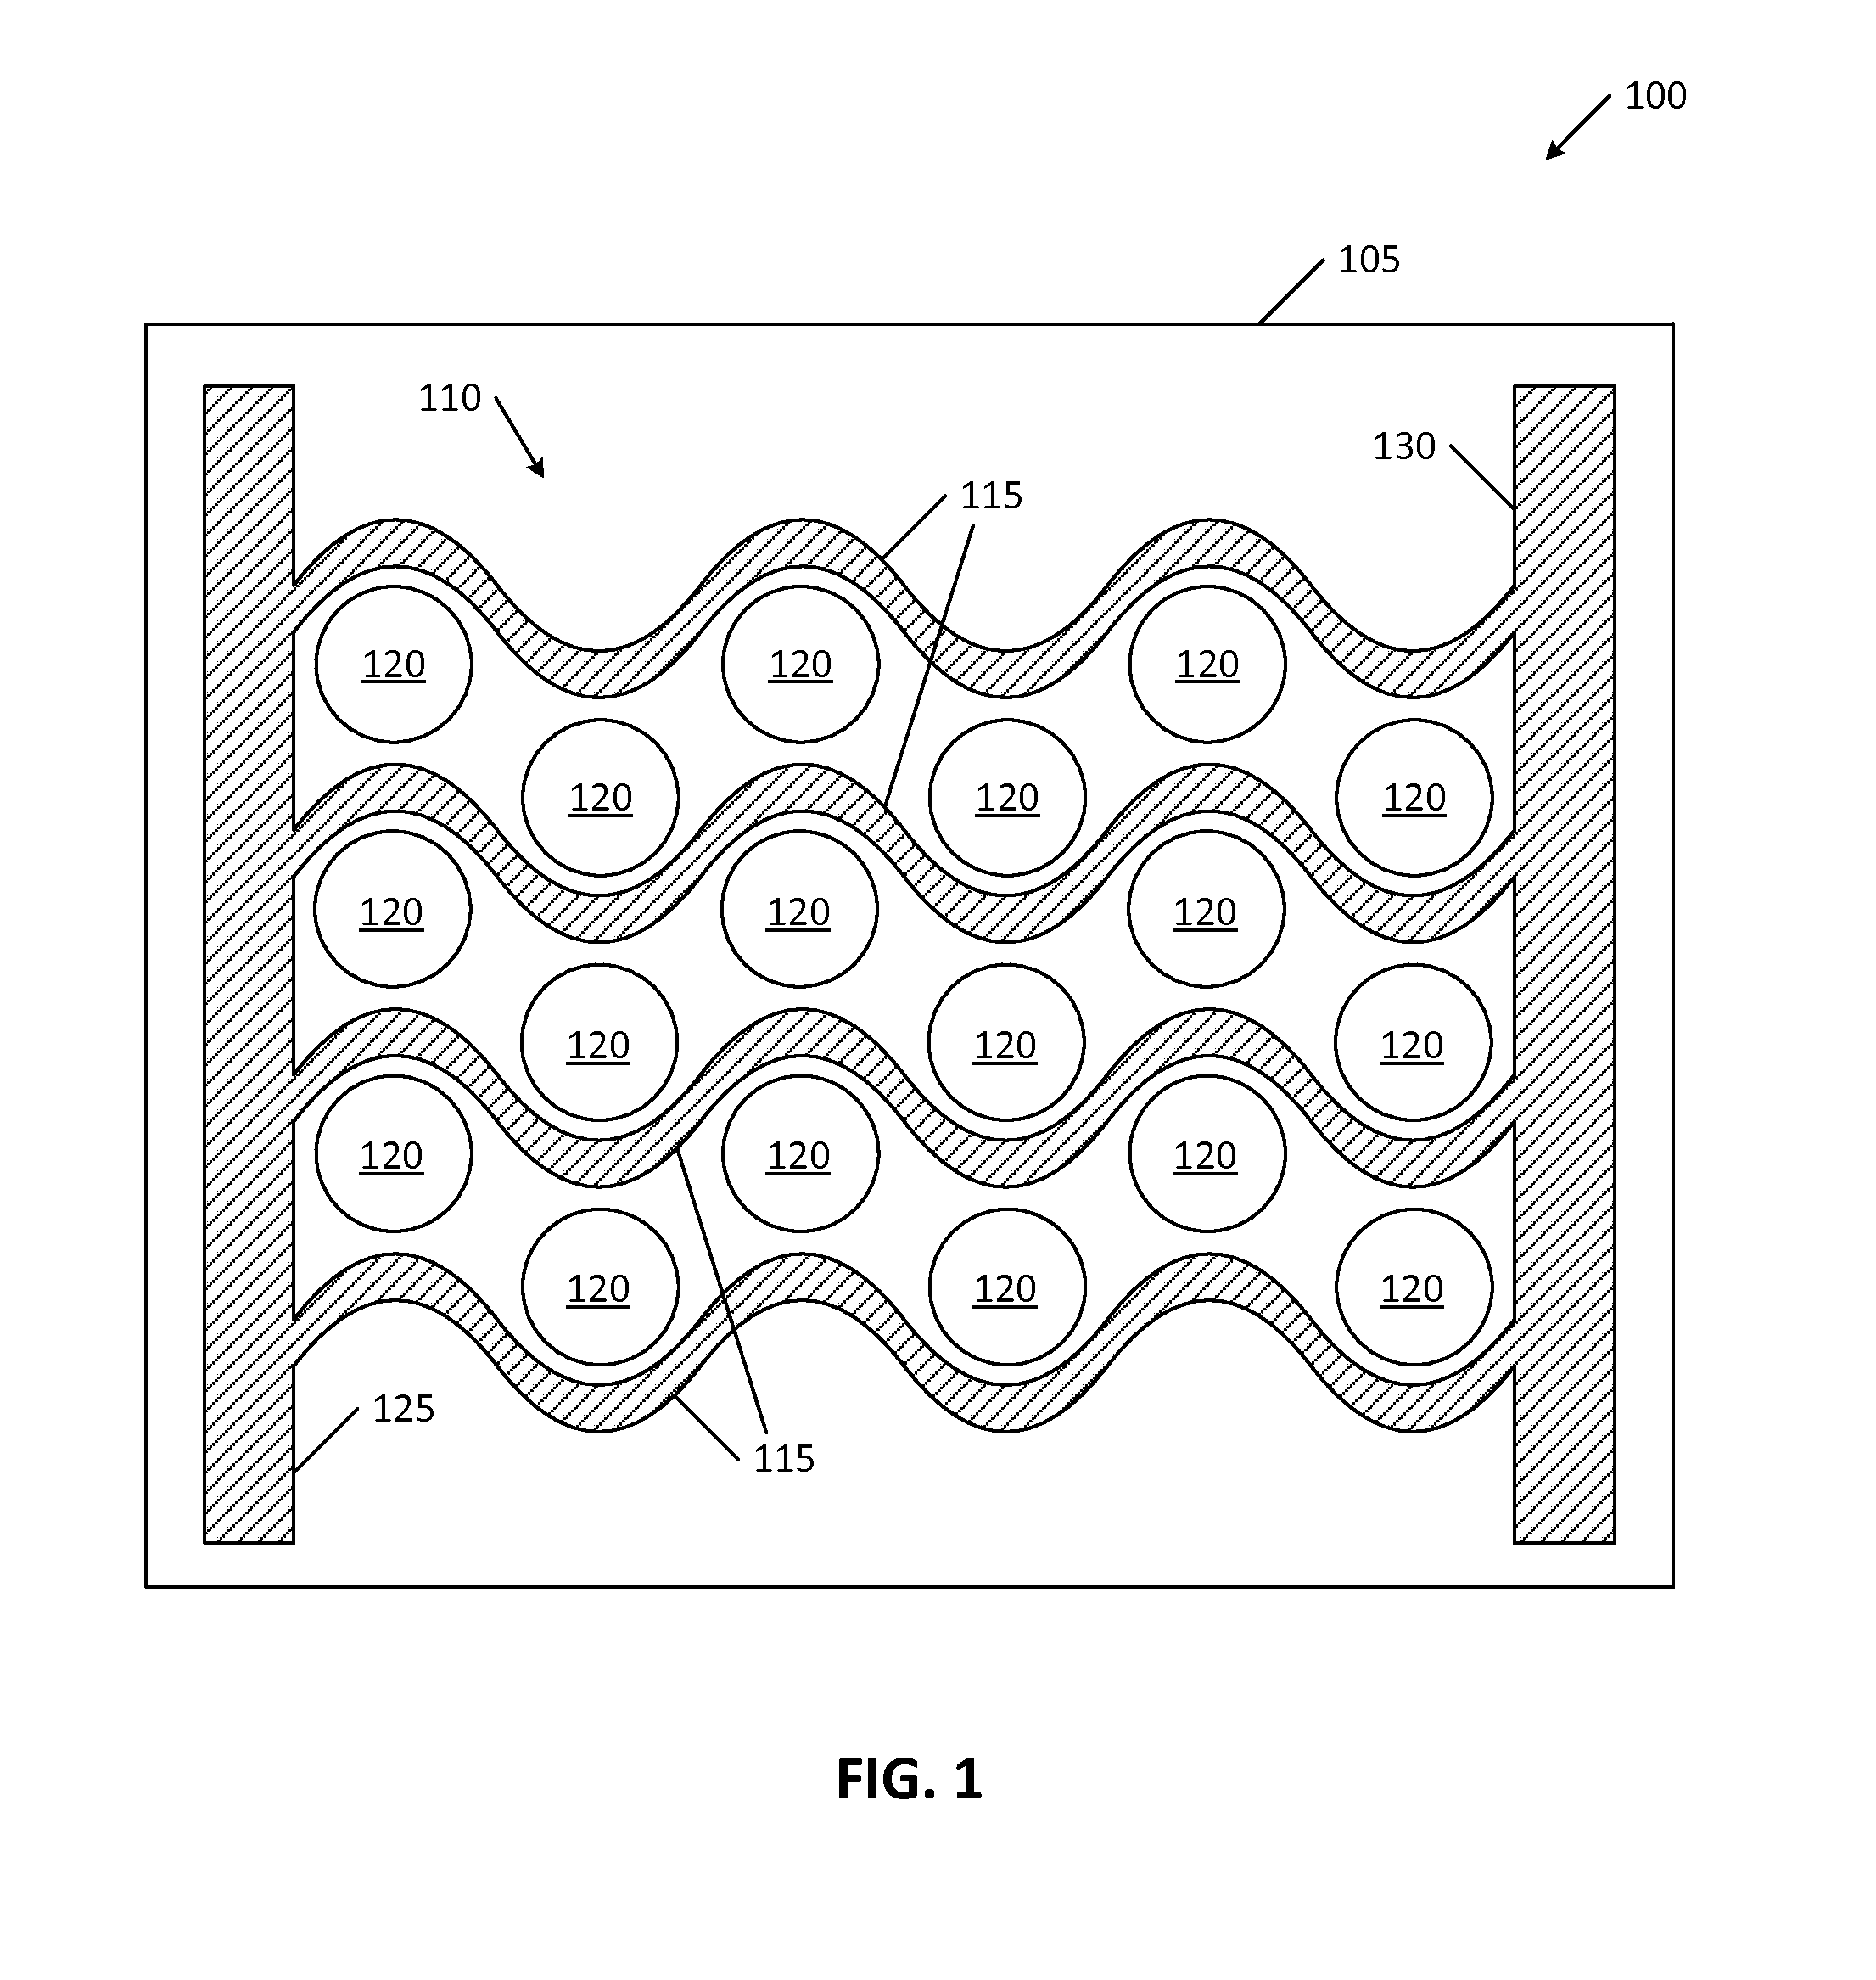 Battery module with integrated thermal management system